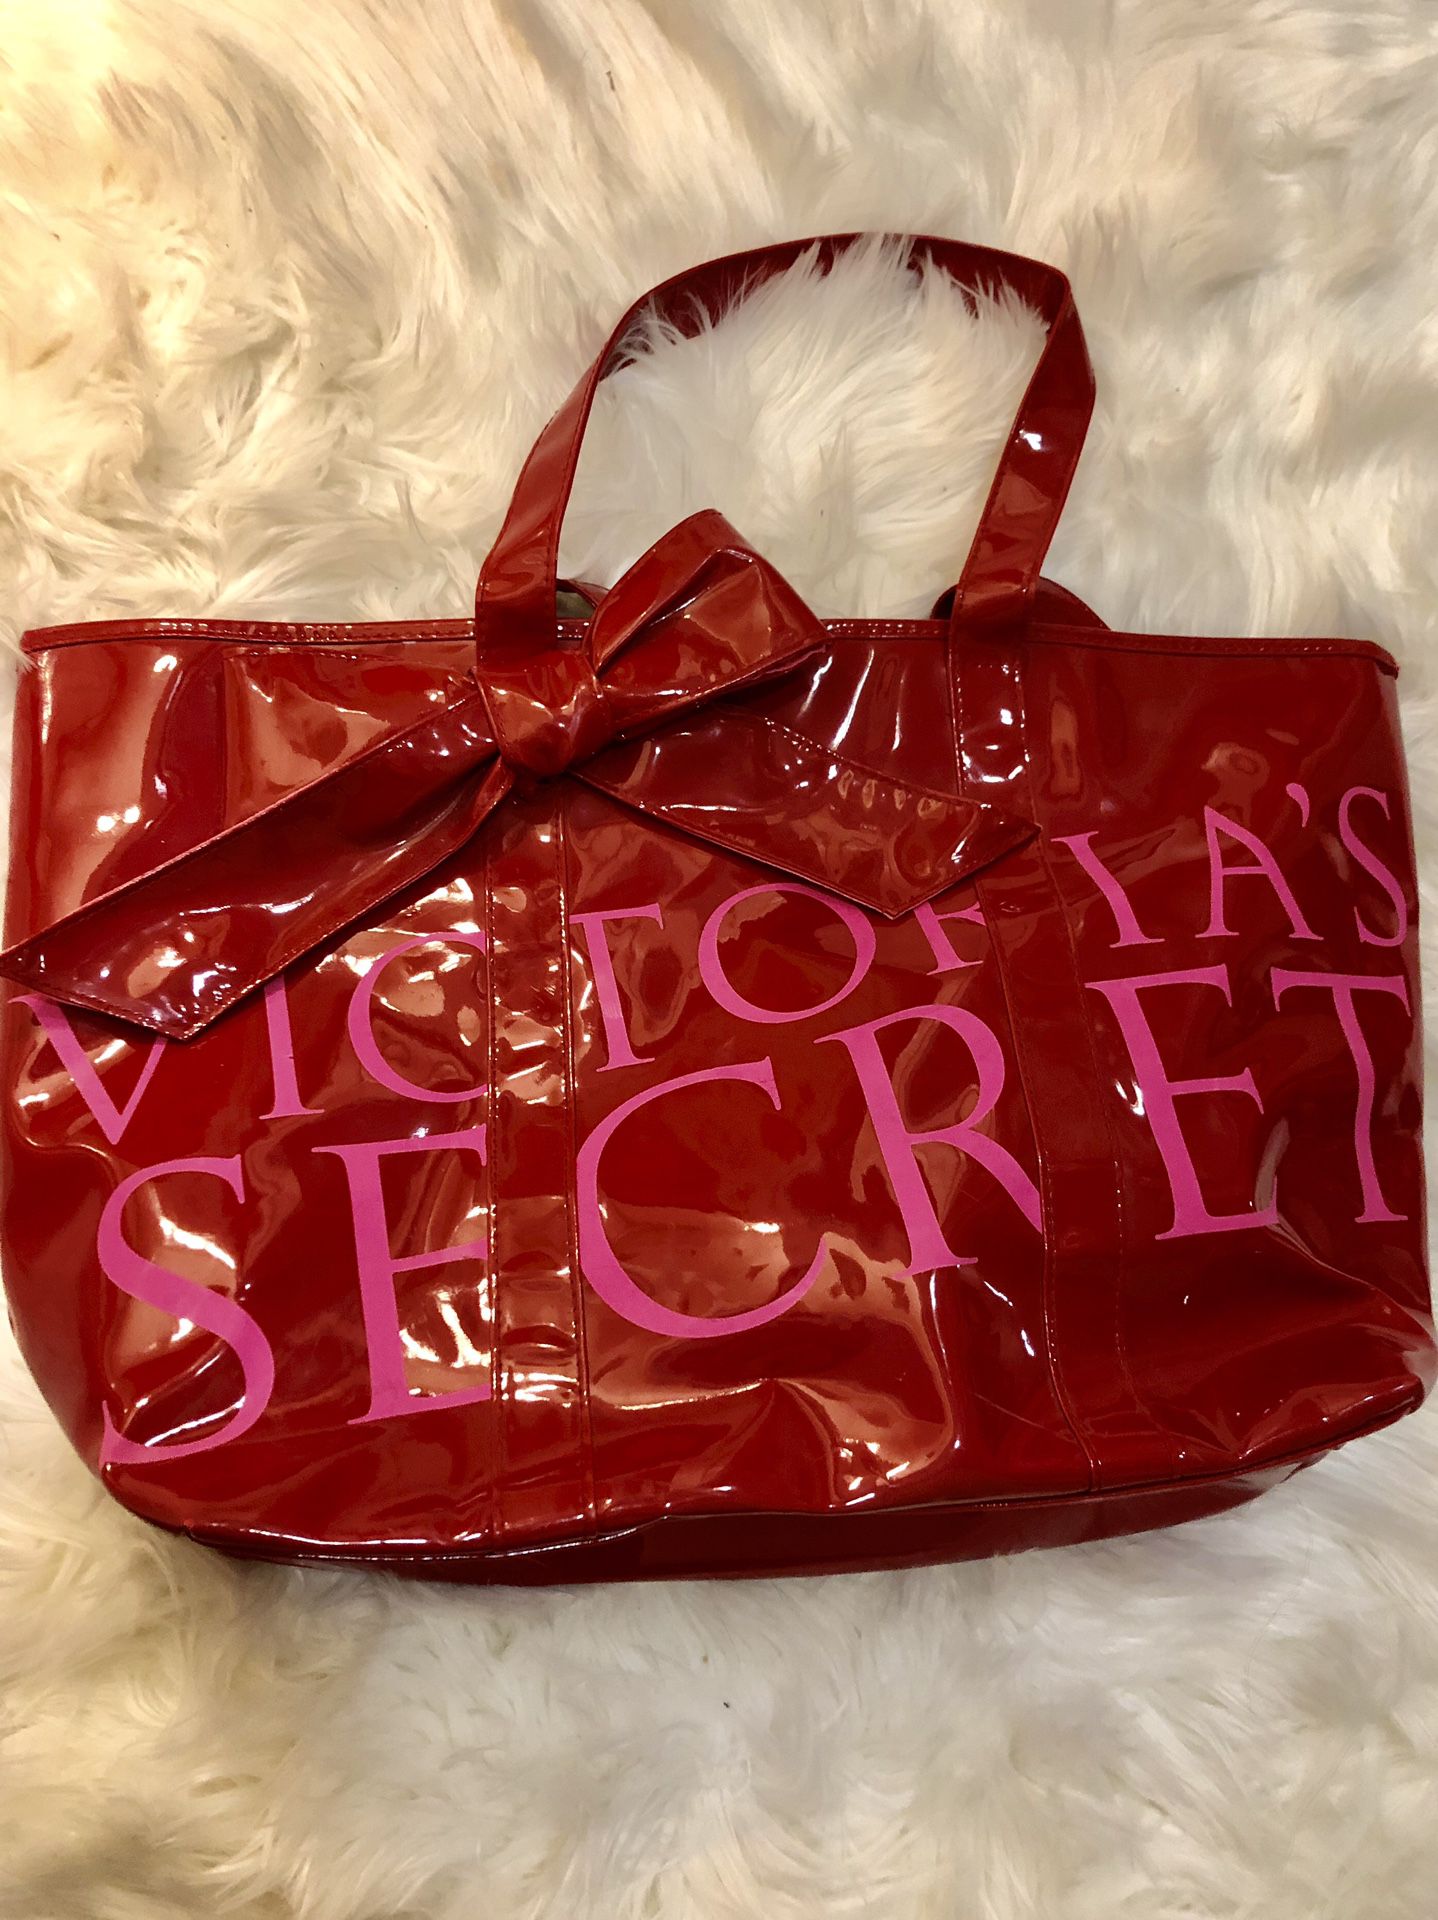 Get the best deals on Victoria's Secret Bow Red Bags & Handbags